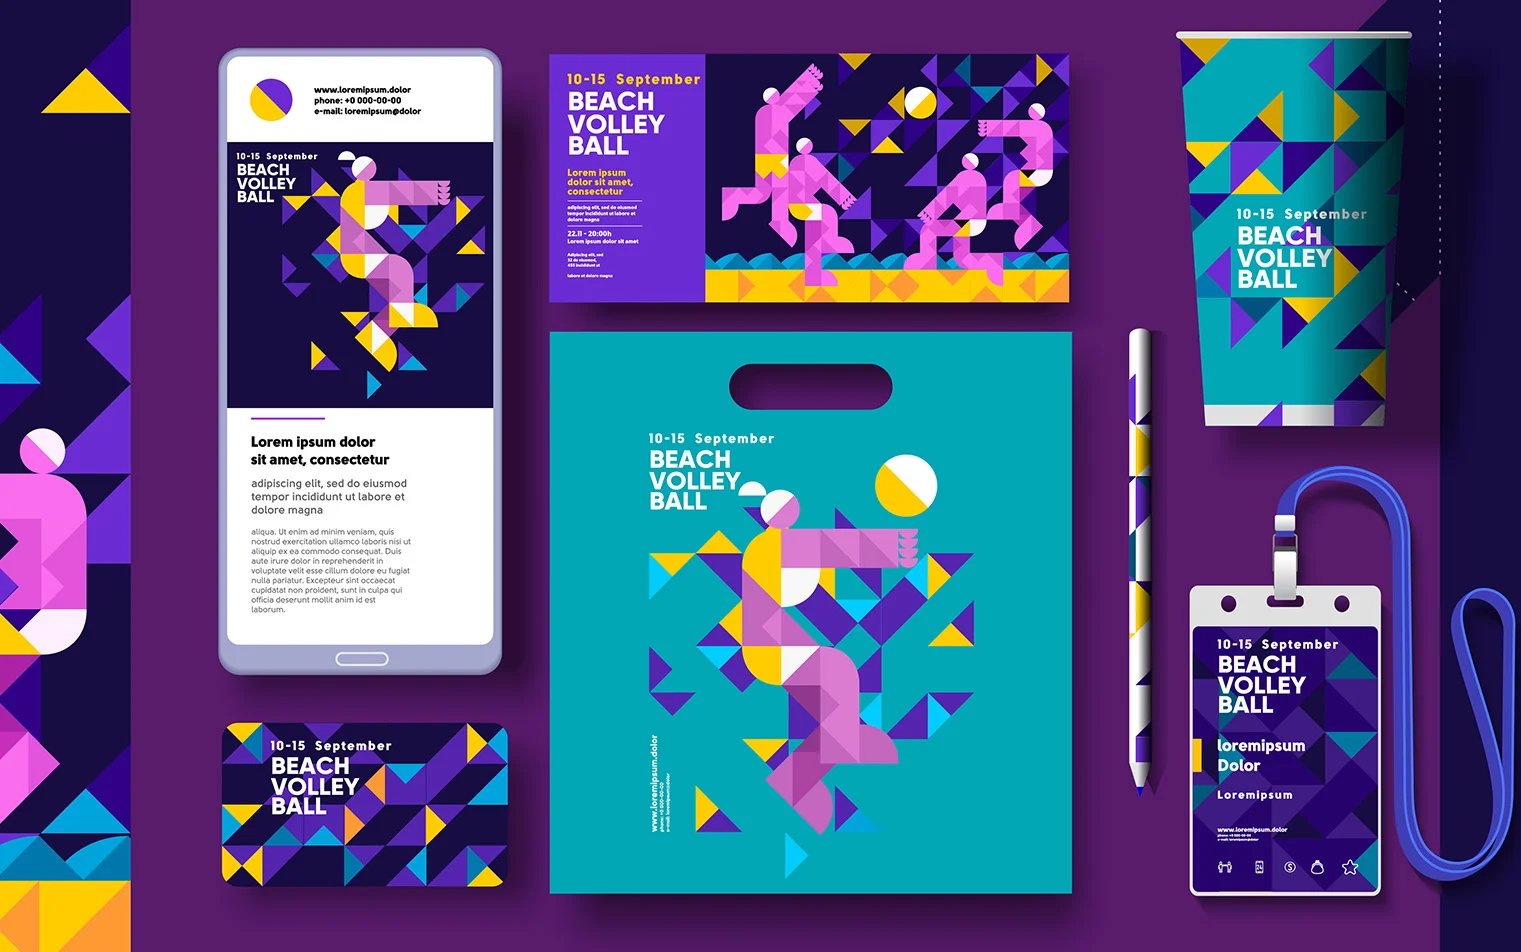 Purple brand guidelines and creative assets with pamfelts, mobile design, badges, and pens